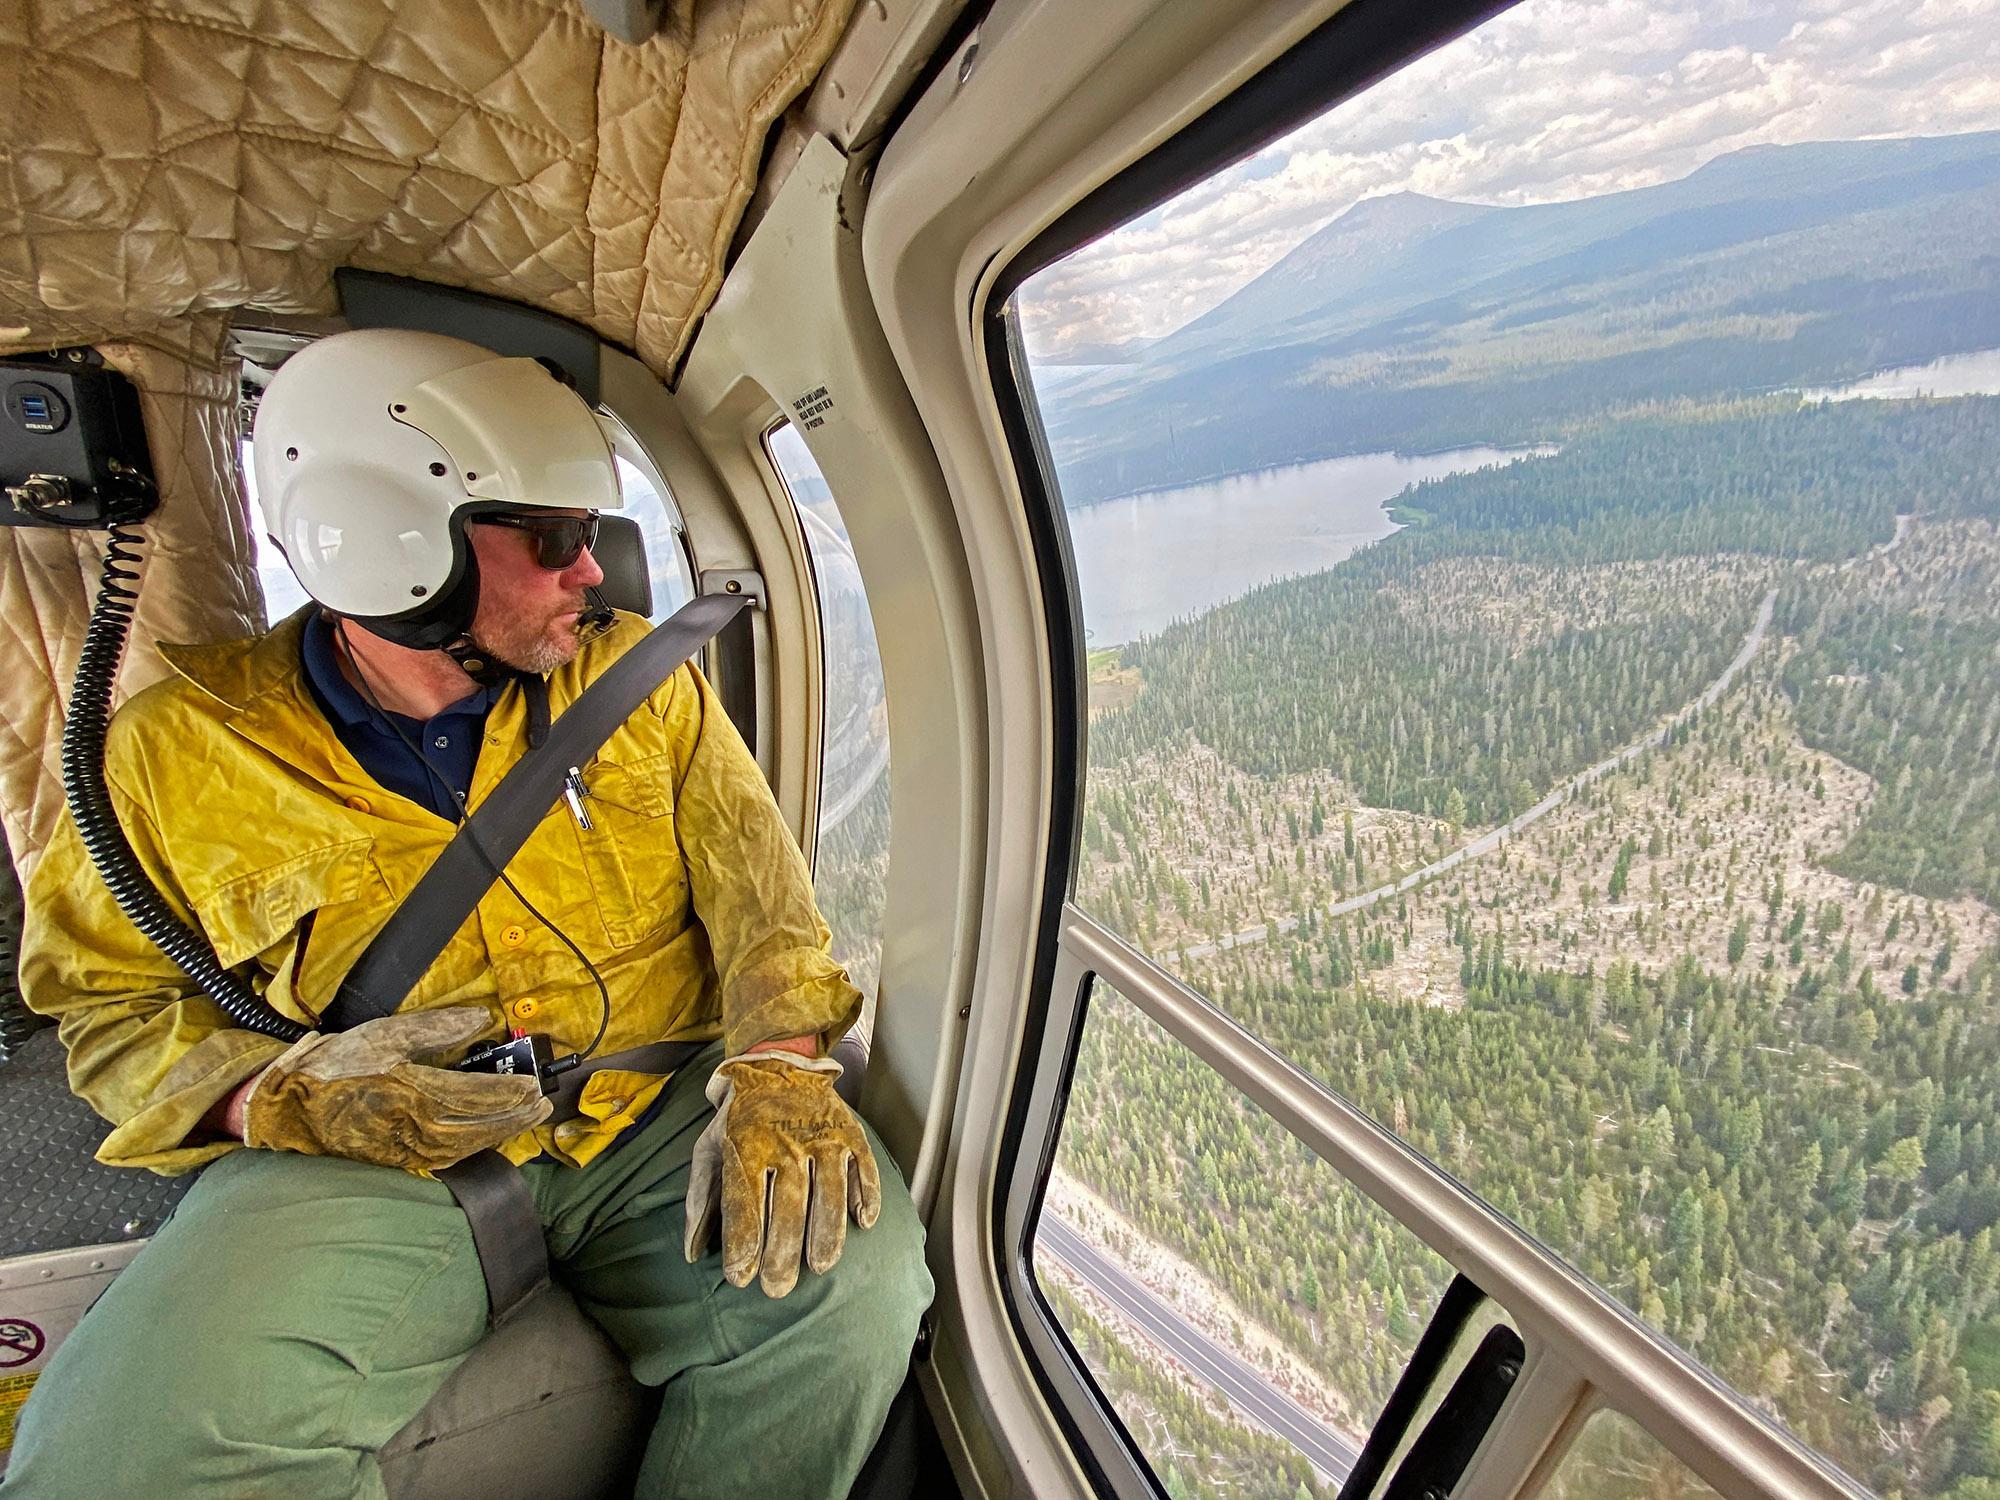 A firefighter with a white aviation helmet is sitting in the back of a helicopter looking out the window.